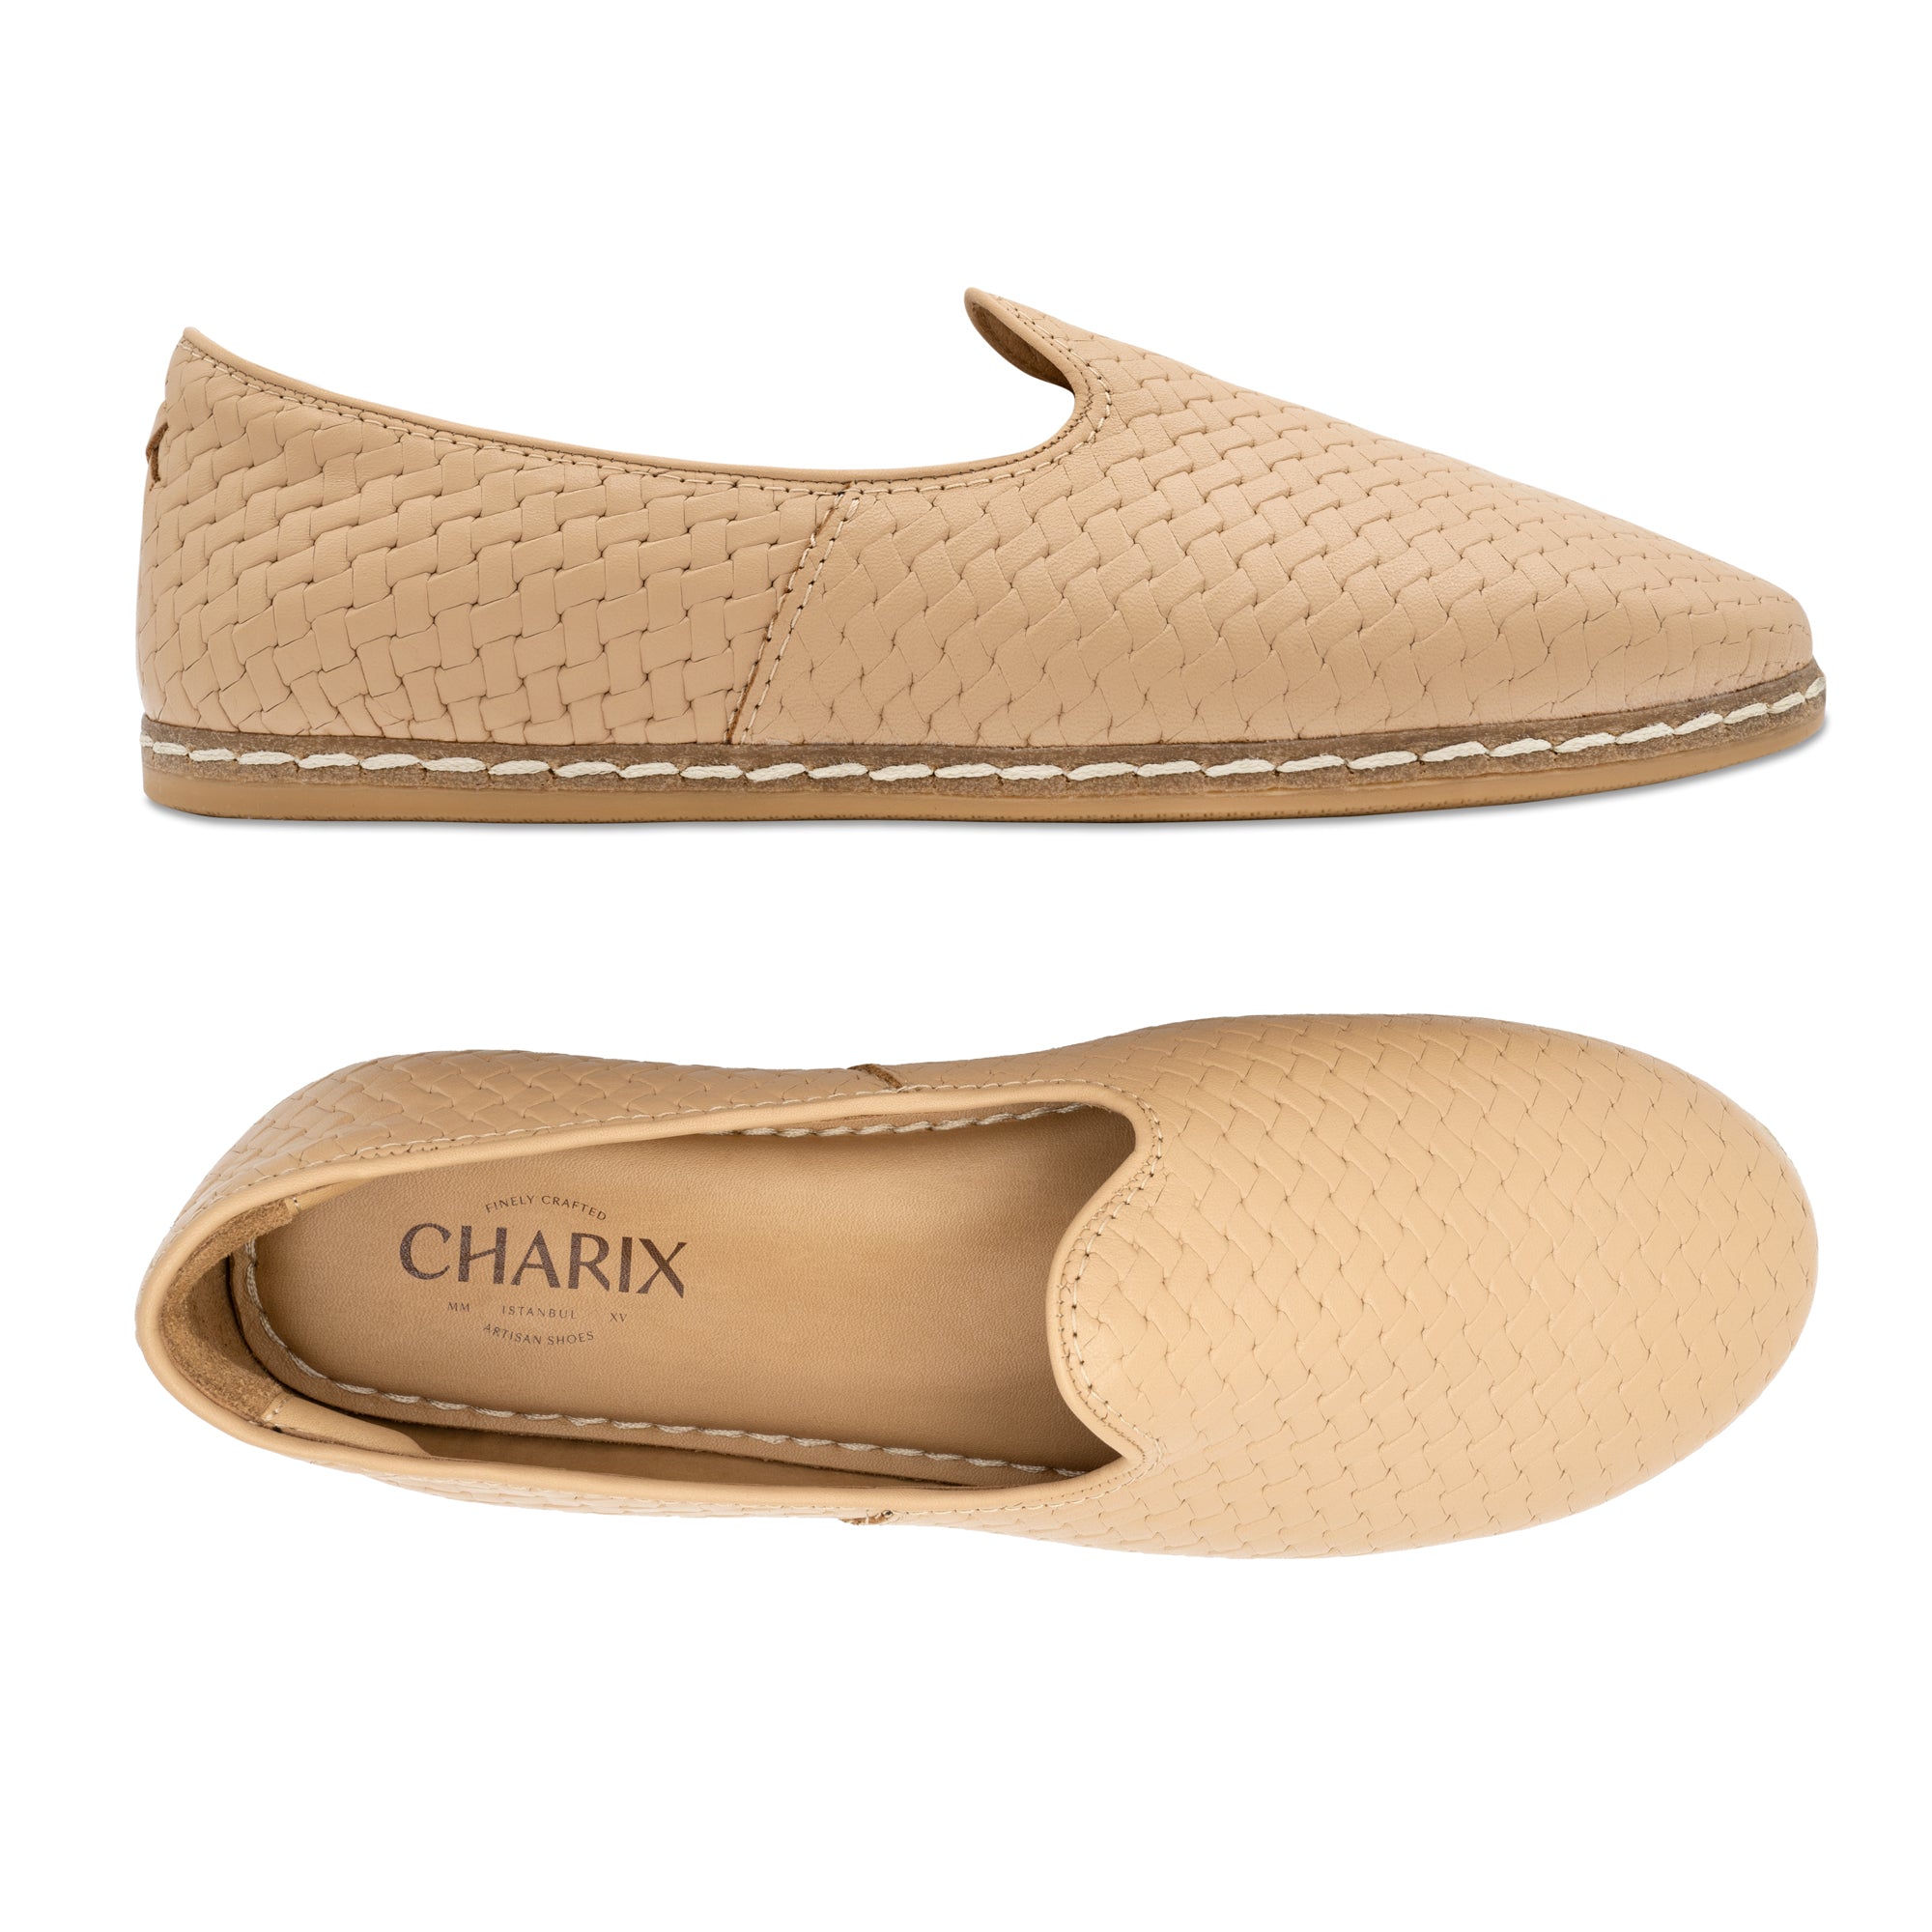 Woven Tan Slip On Shoes - Charix Shoes